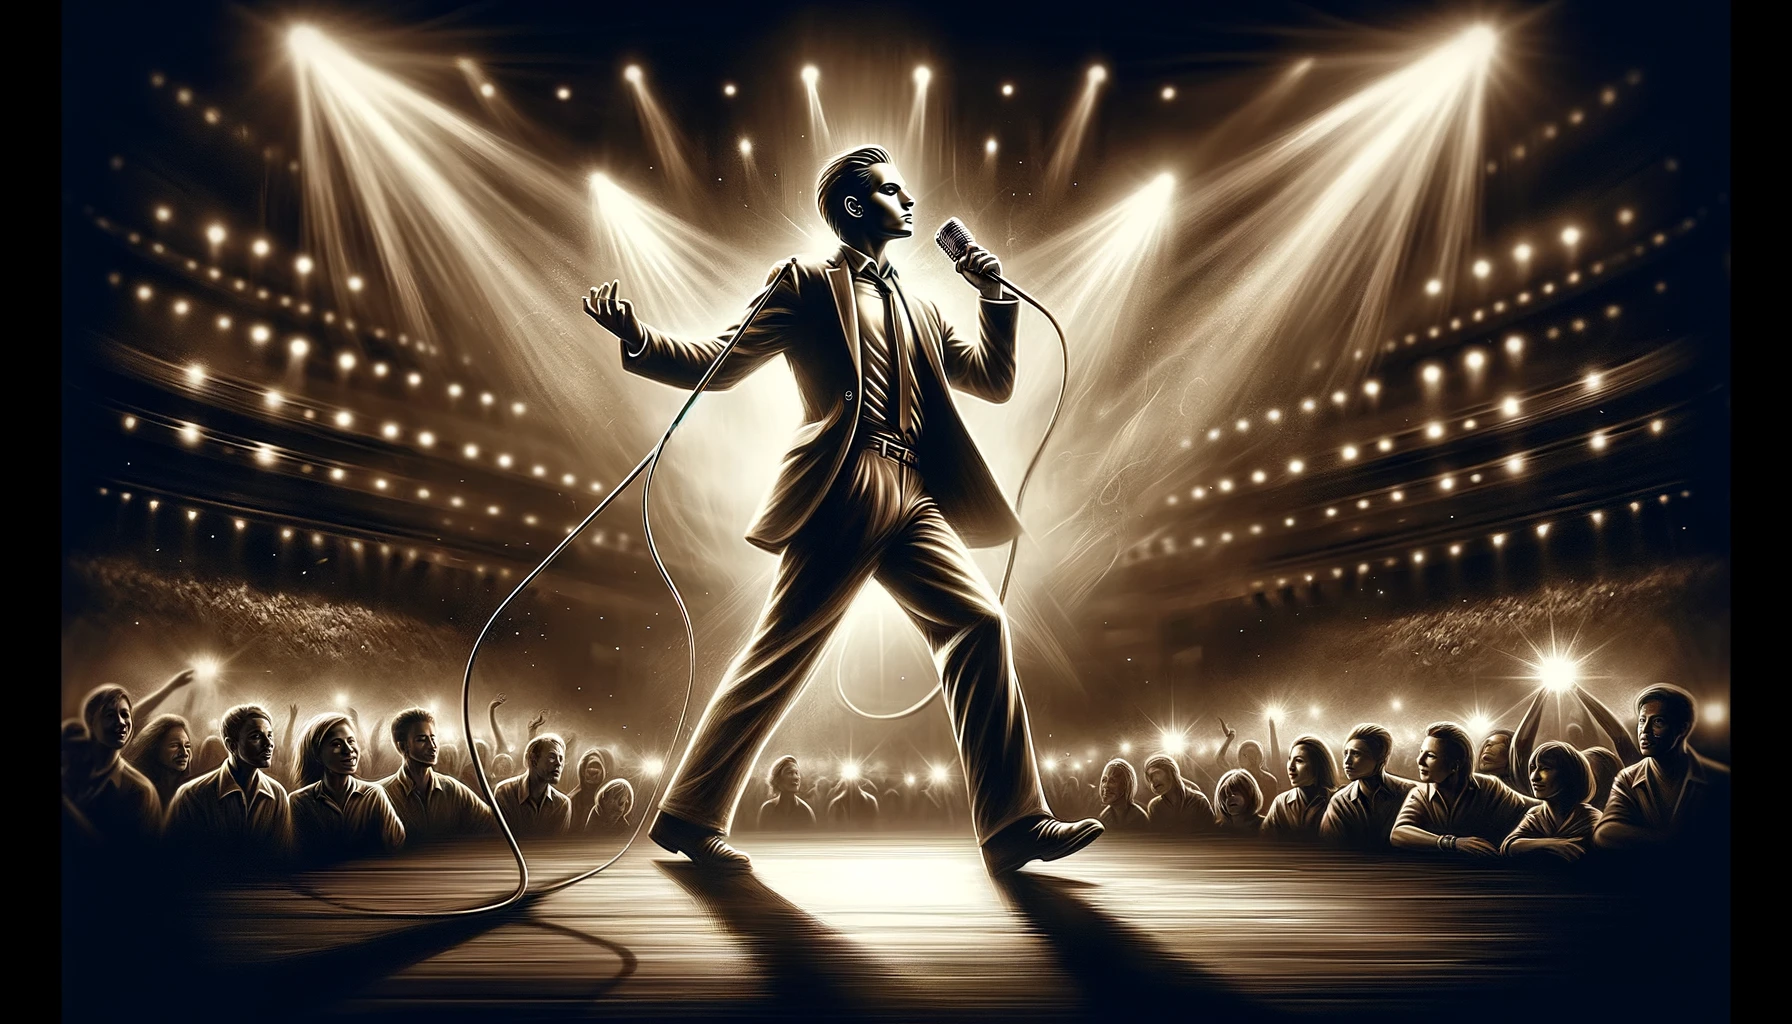 An evocative image portraying the qualities of an artist who has passed the rigorous selection to perform at the Budokan arena in Tokyo, Japan. The artist is depicted on stage, confident and poised, engaging deeply with the audience. This individual exudes charisma, skill, and passion, shown in the midst of an emotional performance with a dynamic backdrop of intense stage lighting and a captivated crowd. The scene emphasizes the artist's exceptional talent and the high standards required to perform at such a prestigious venue, in a wide 16:9 format.